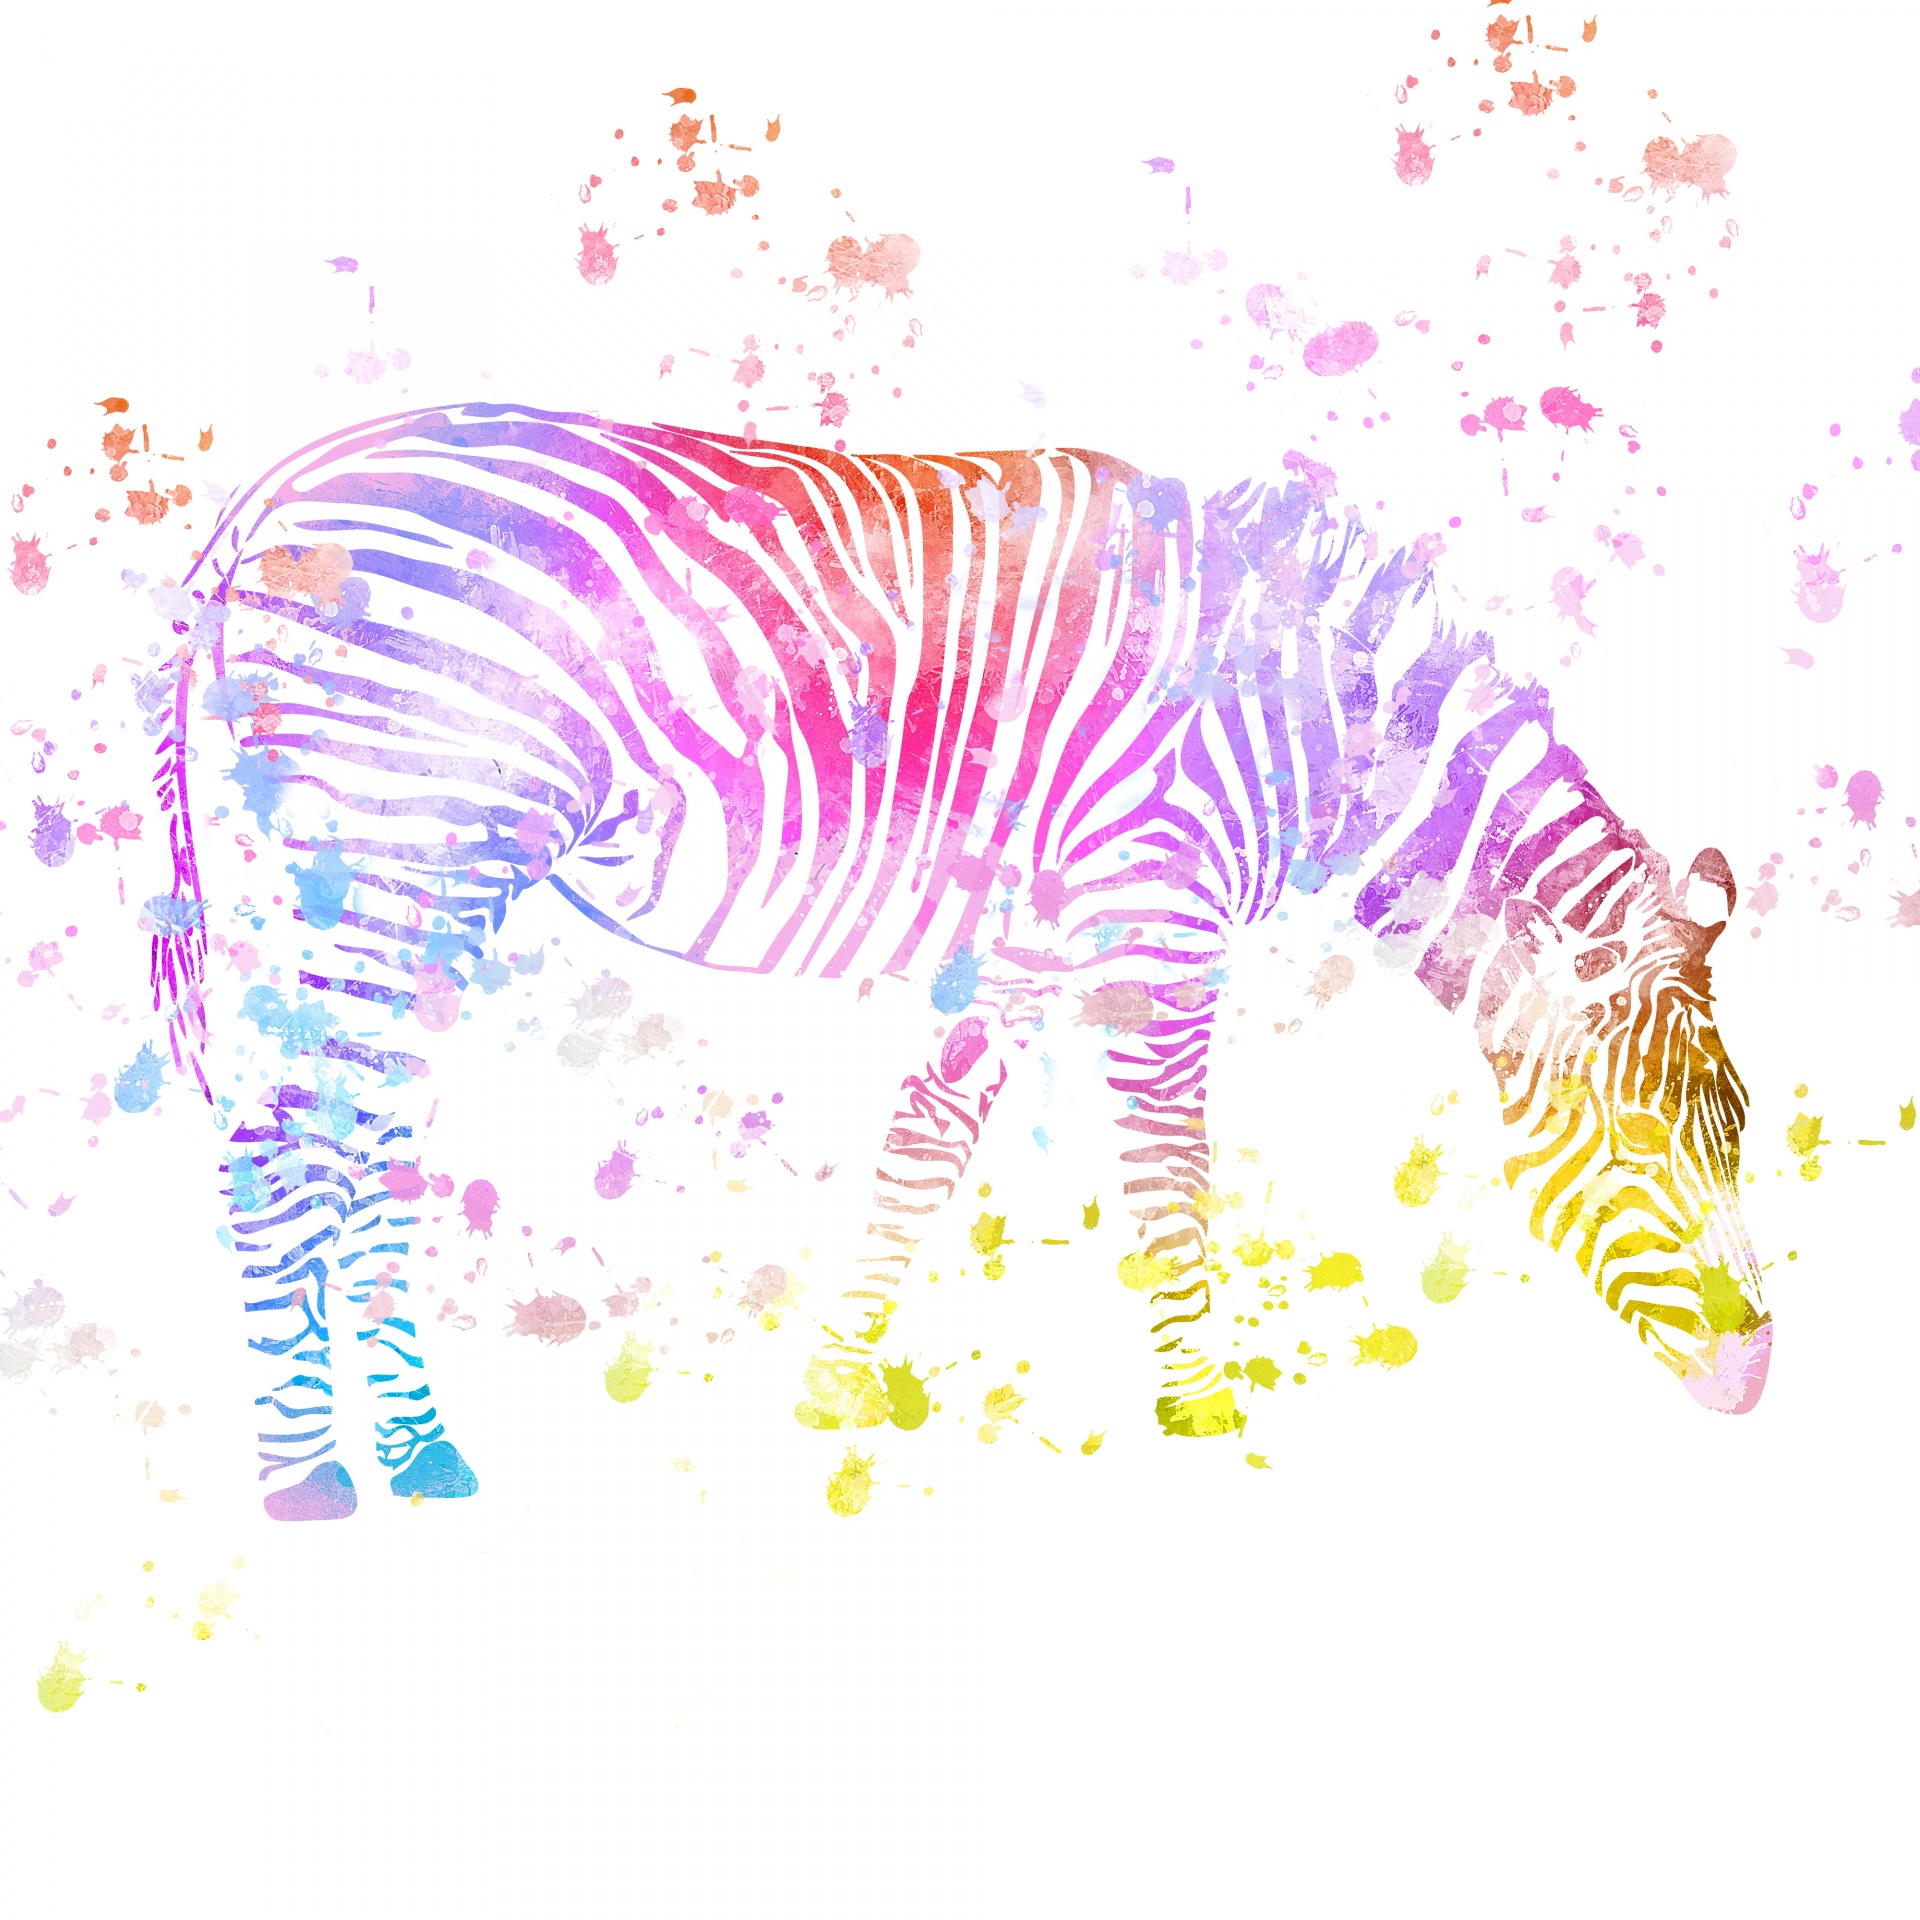 Colorful zebra with watercolor paint or ink splatters